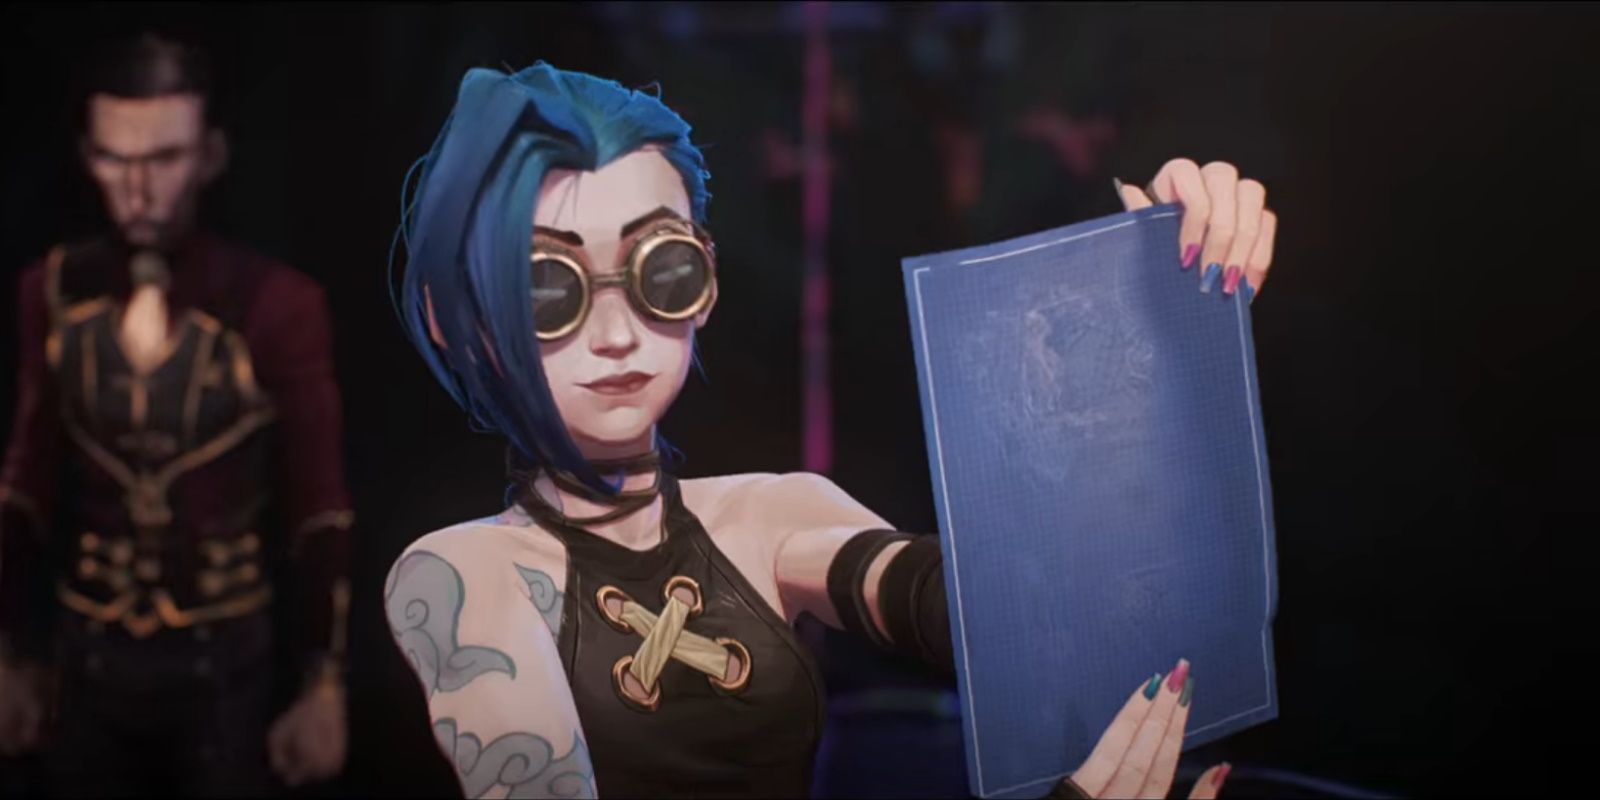 How to Build League of Legends Jinx in Dungeons & Dragons